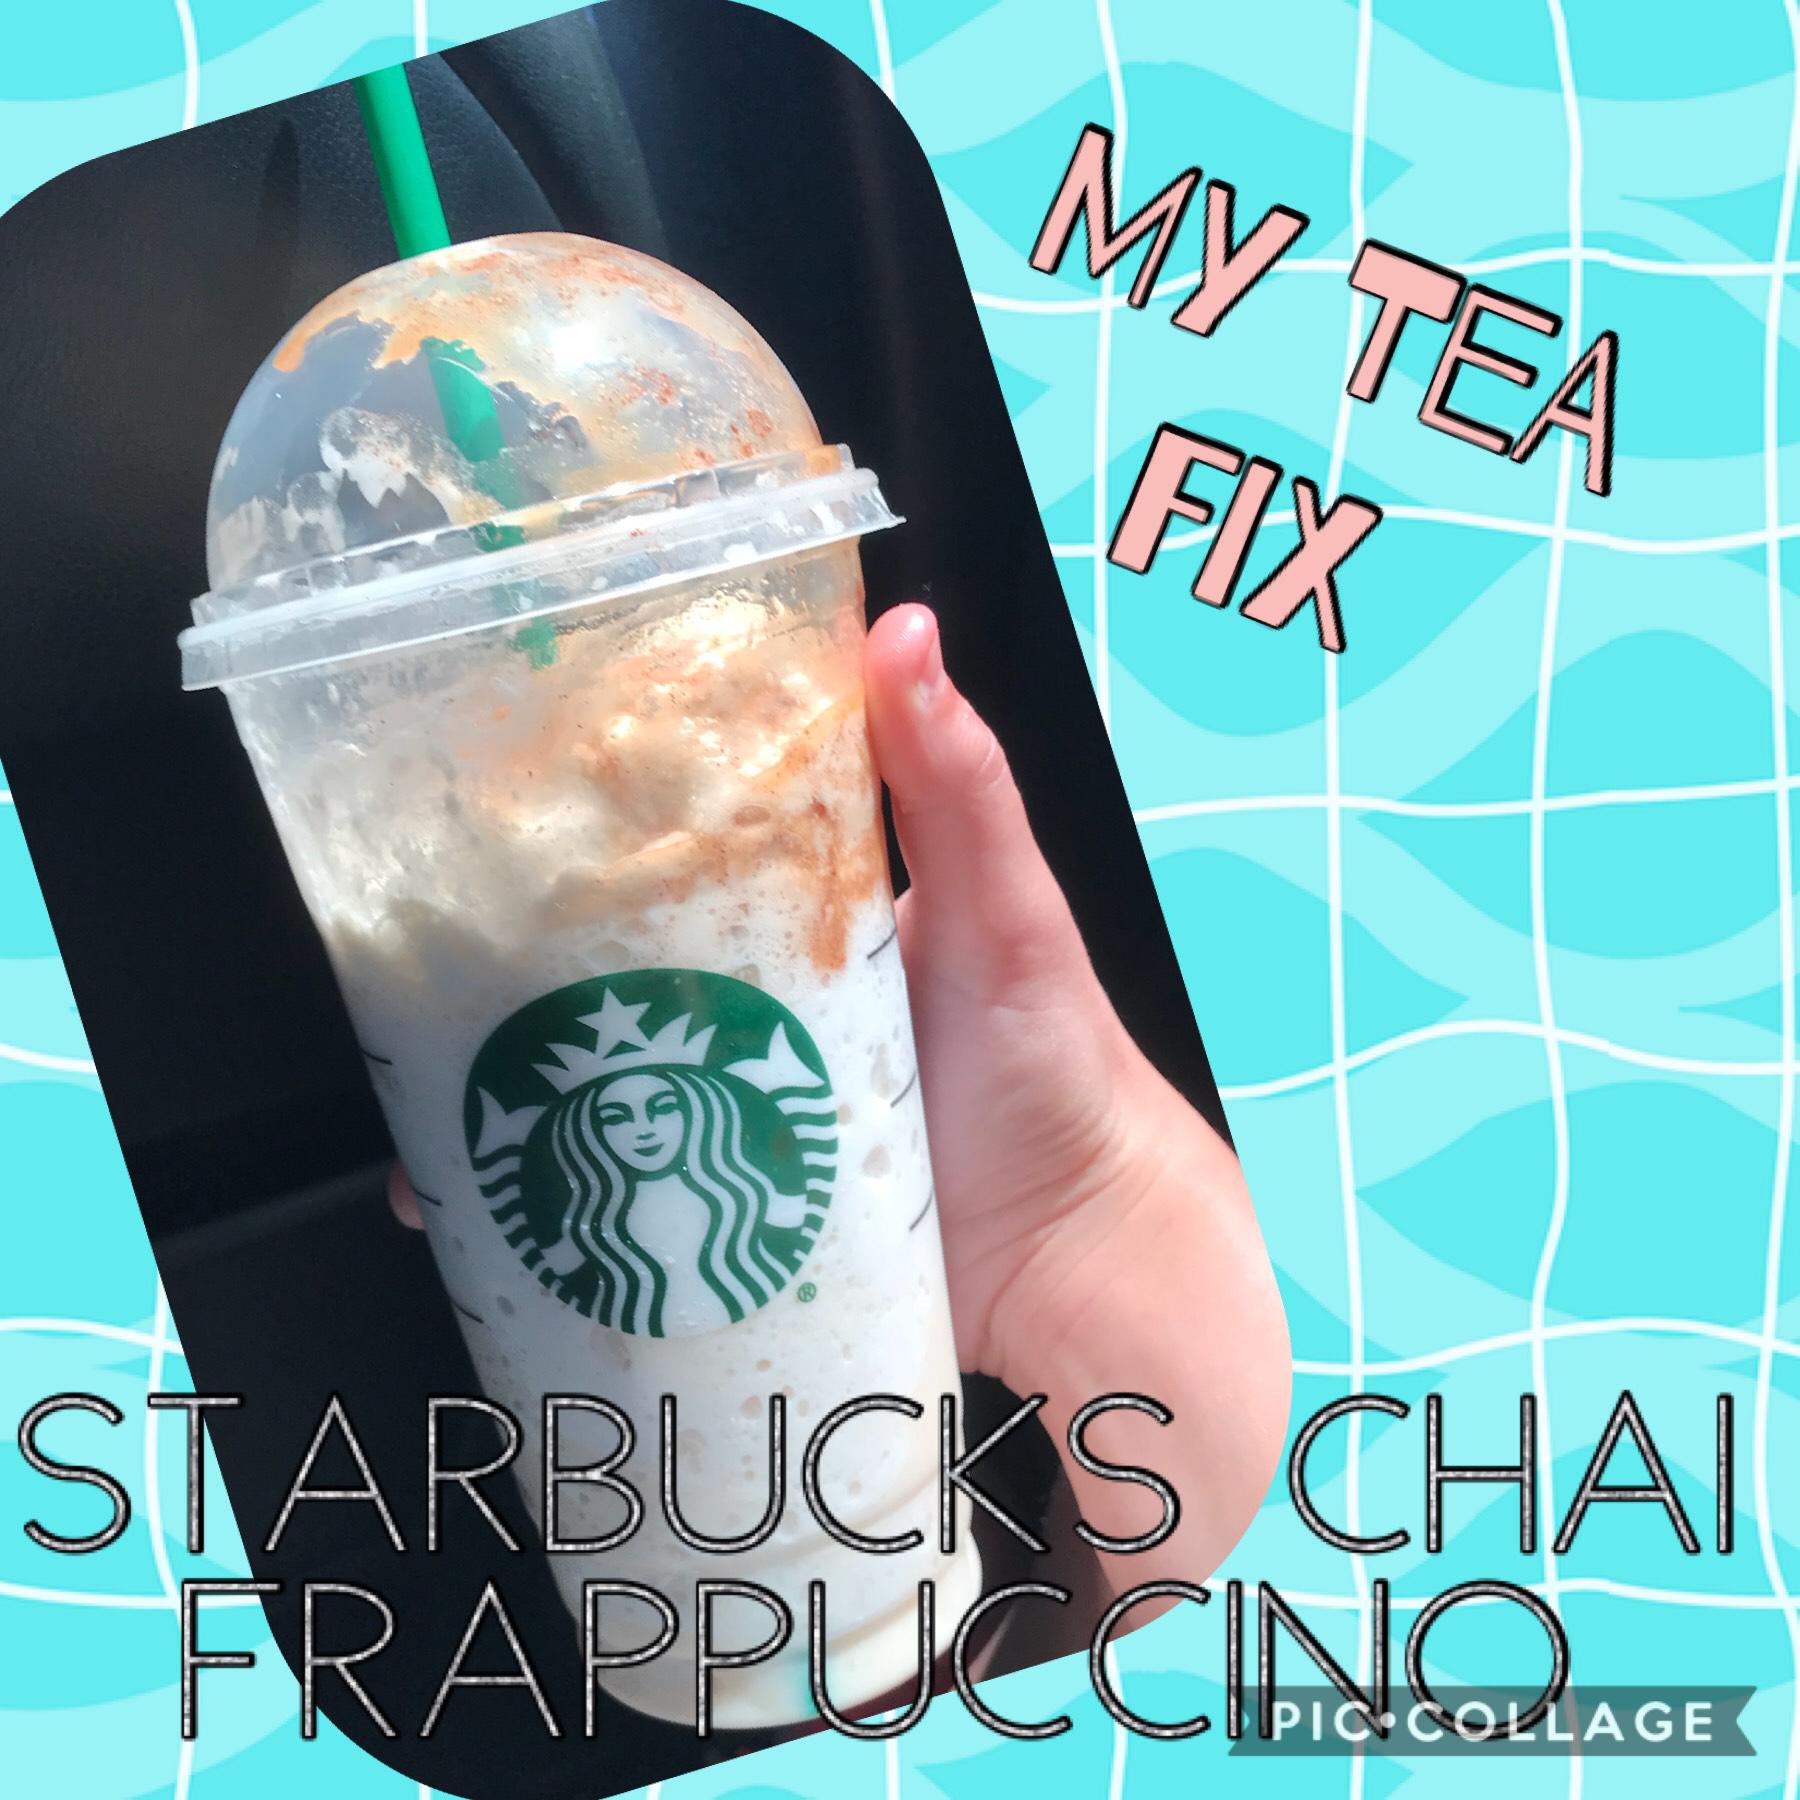 Yummm😋😋I love my chai tea. If you want this drunk from Starbucks either ask for a chai   frappuccino or for a iced blended chai tea. It’s got this delicious whipped cream and caramel on top. 😍😍😍